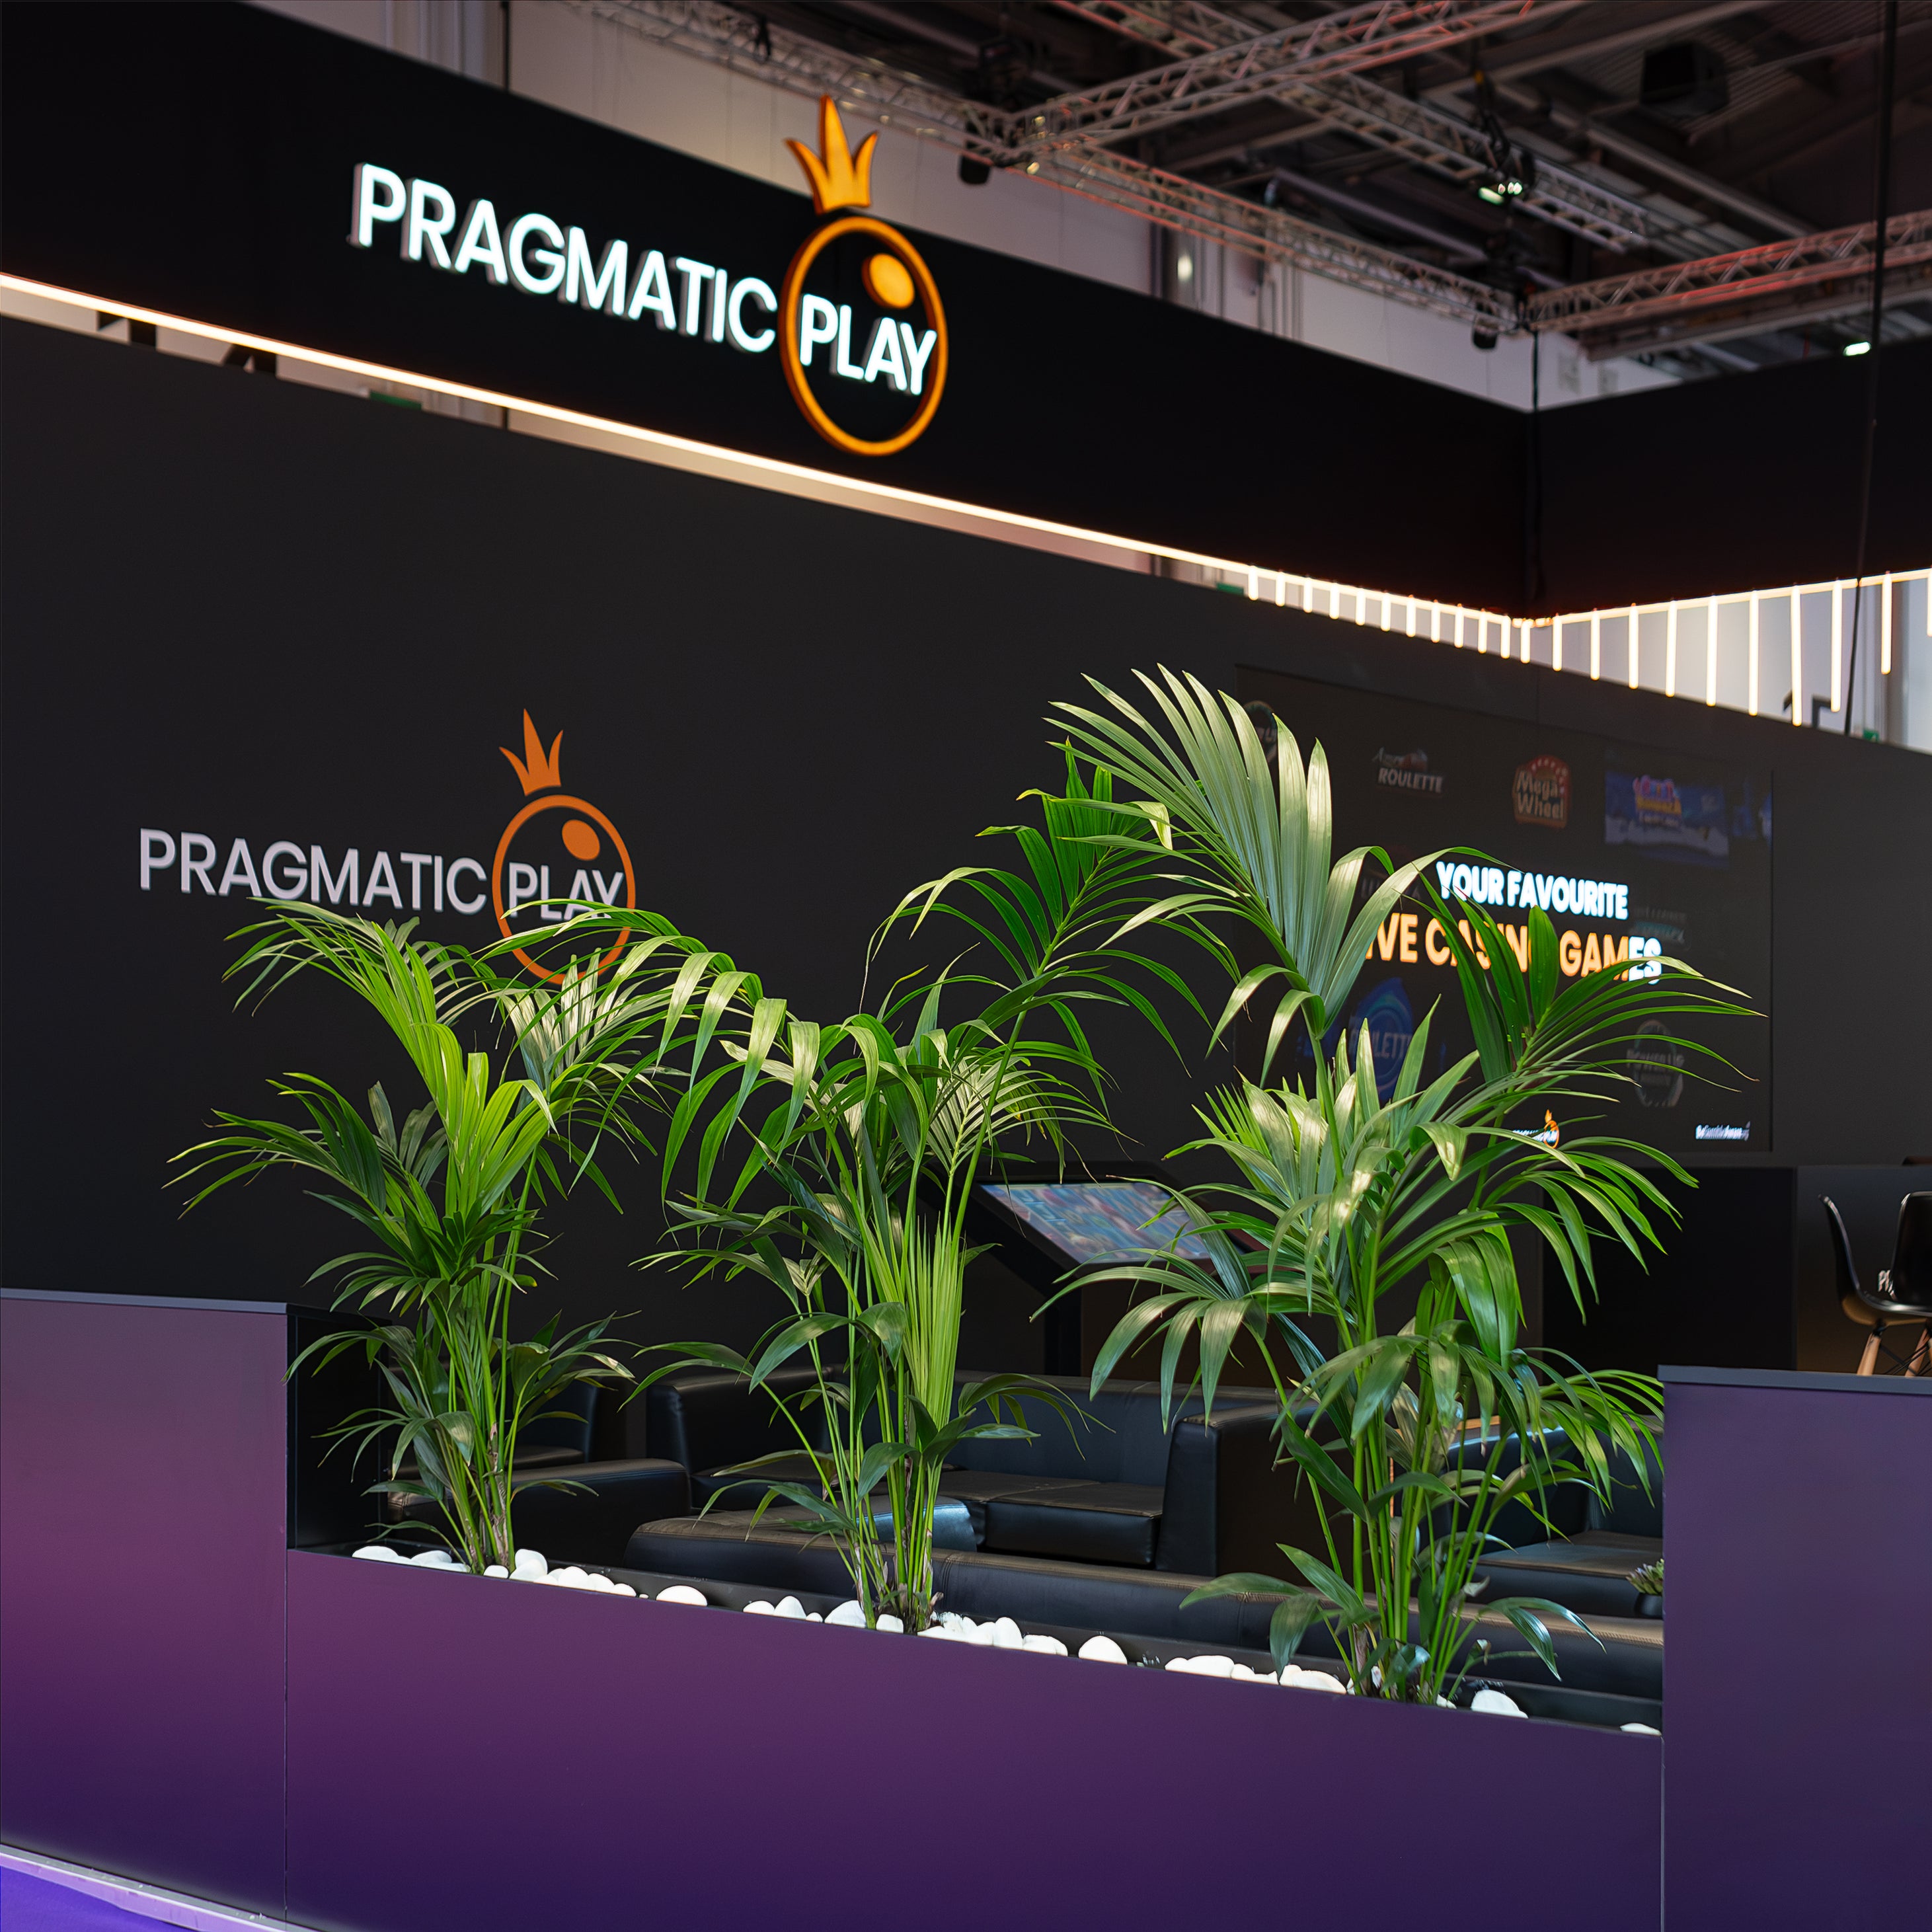 The Pragmatic Play booth at ICE London Exhibition is accented with an array of lush greenery designed by our event florists to provide a sense of vitality and freshness to the gaming brand's sophisticated presentation space.